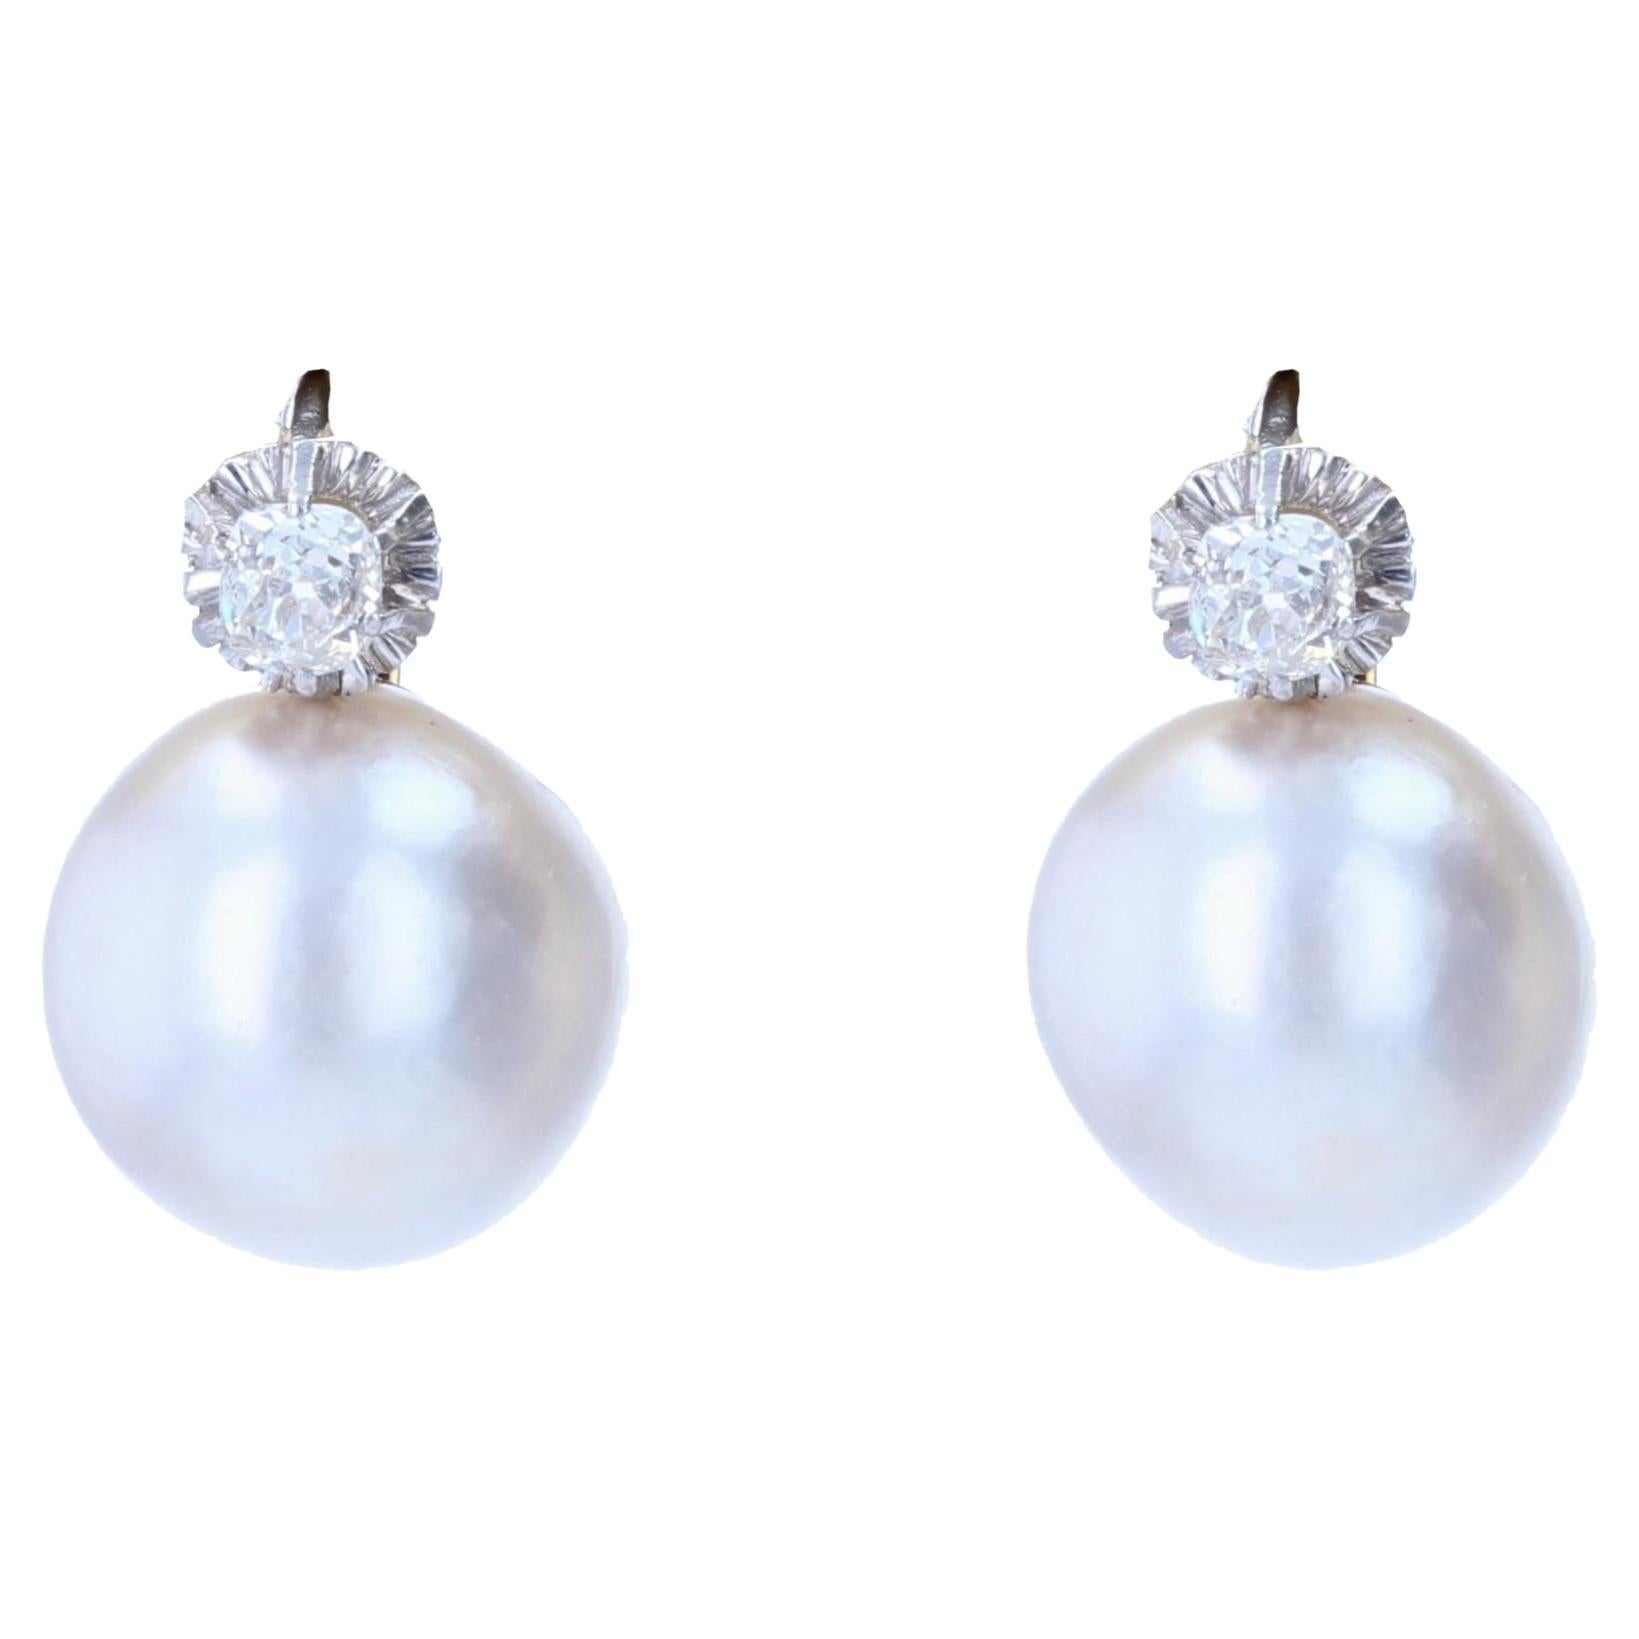 Vintage 6 Carat Diamond Cultured Pearl Drop Earrings White Gold 20th ...